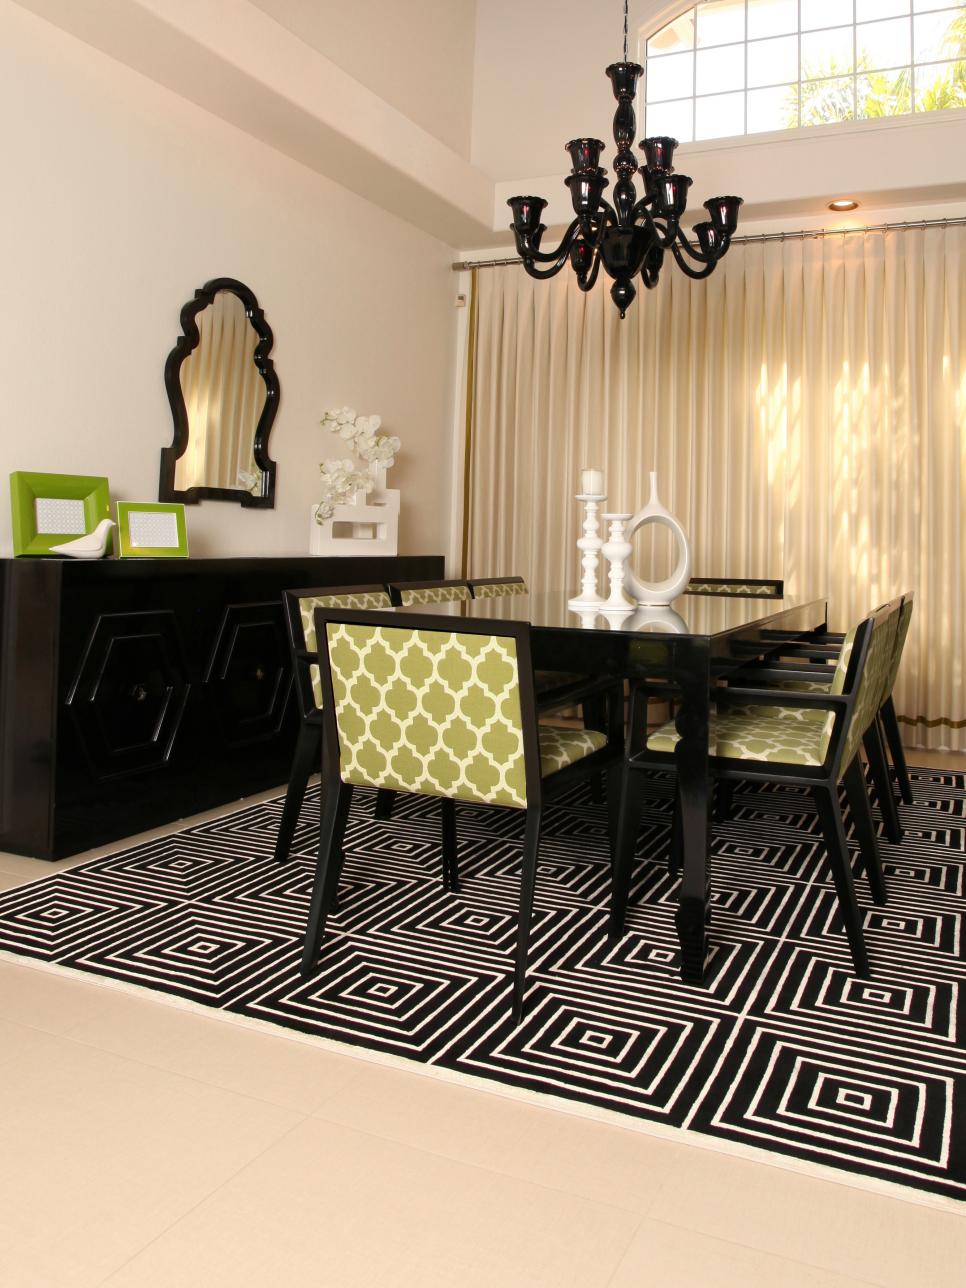 Contemporary Dining Room With Green, White and Black Color Palette